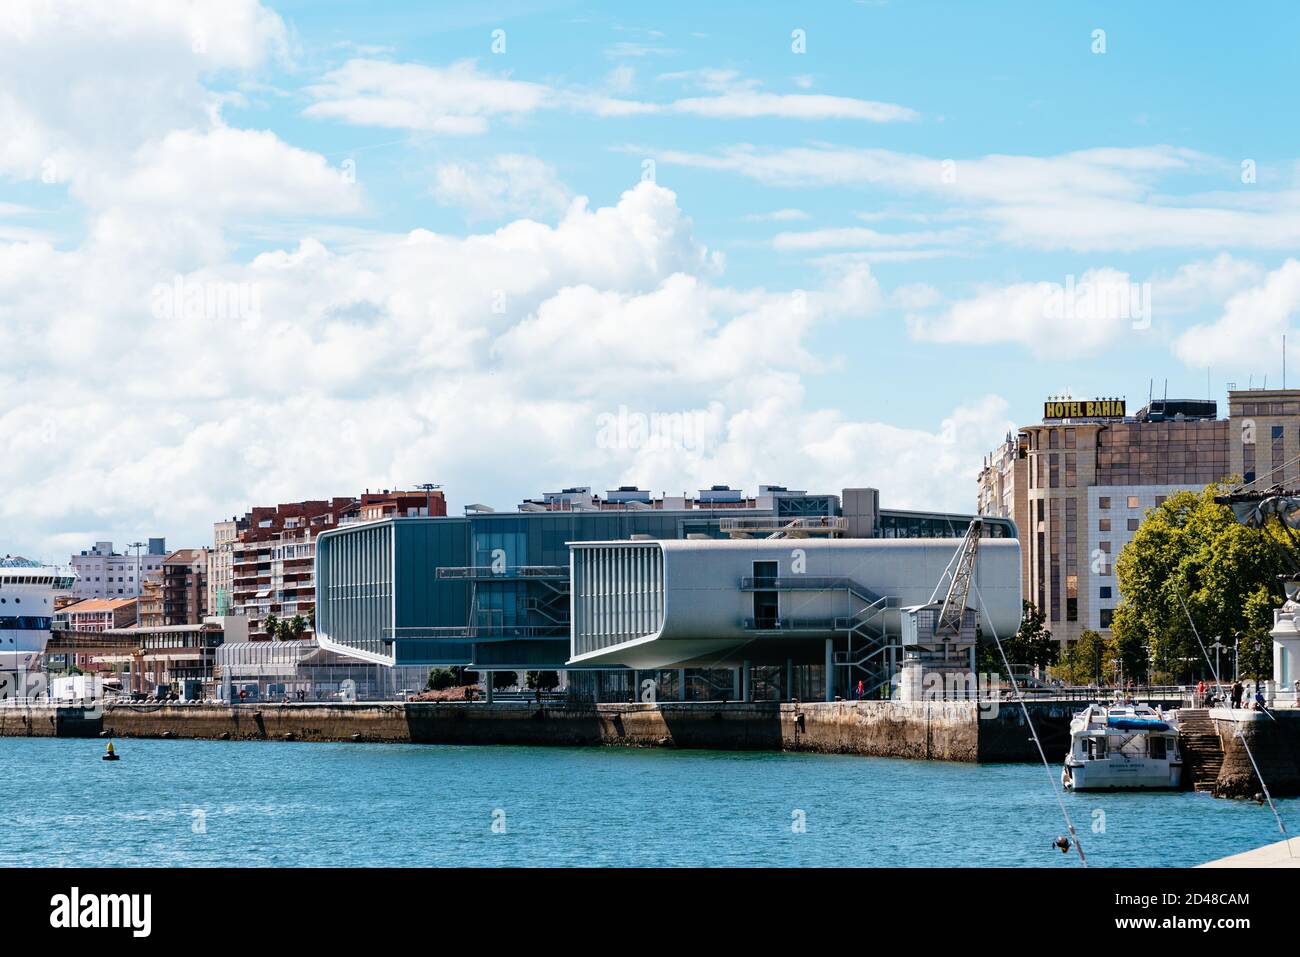 Santander, Spain - 13 September 2020: View of the Centro Botin, an arts centre designed by Pritzker Prize-winner architect Renzo Piano Stock Photo